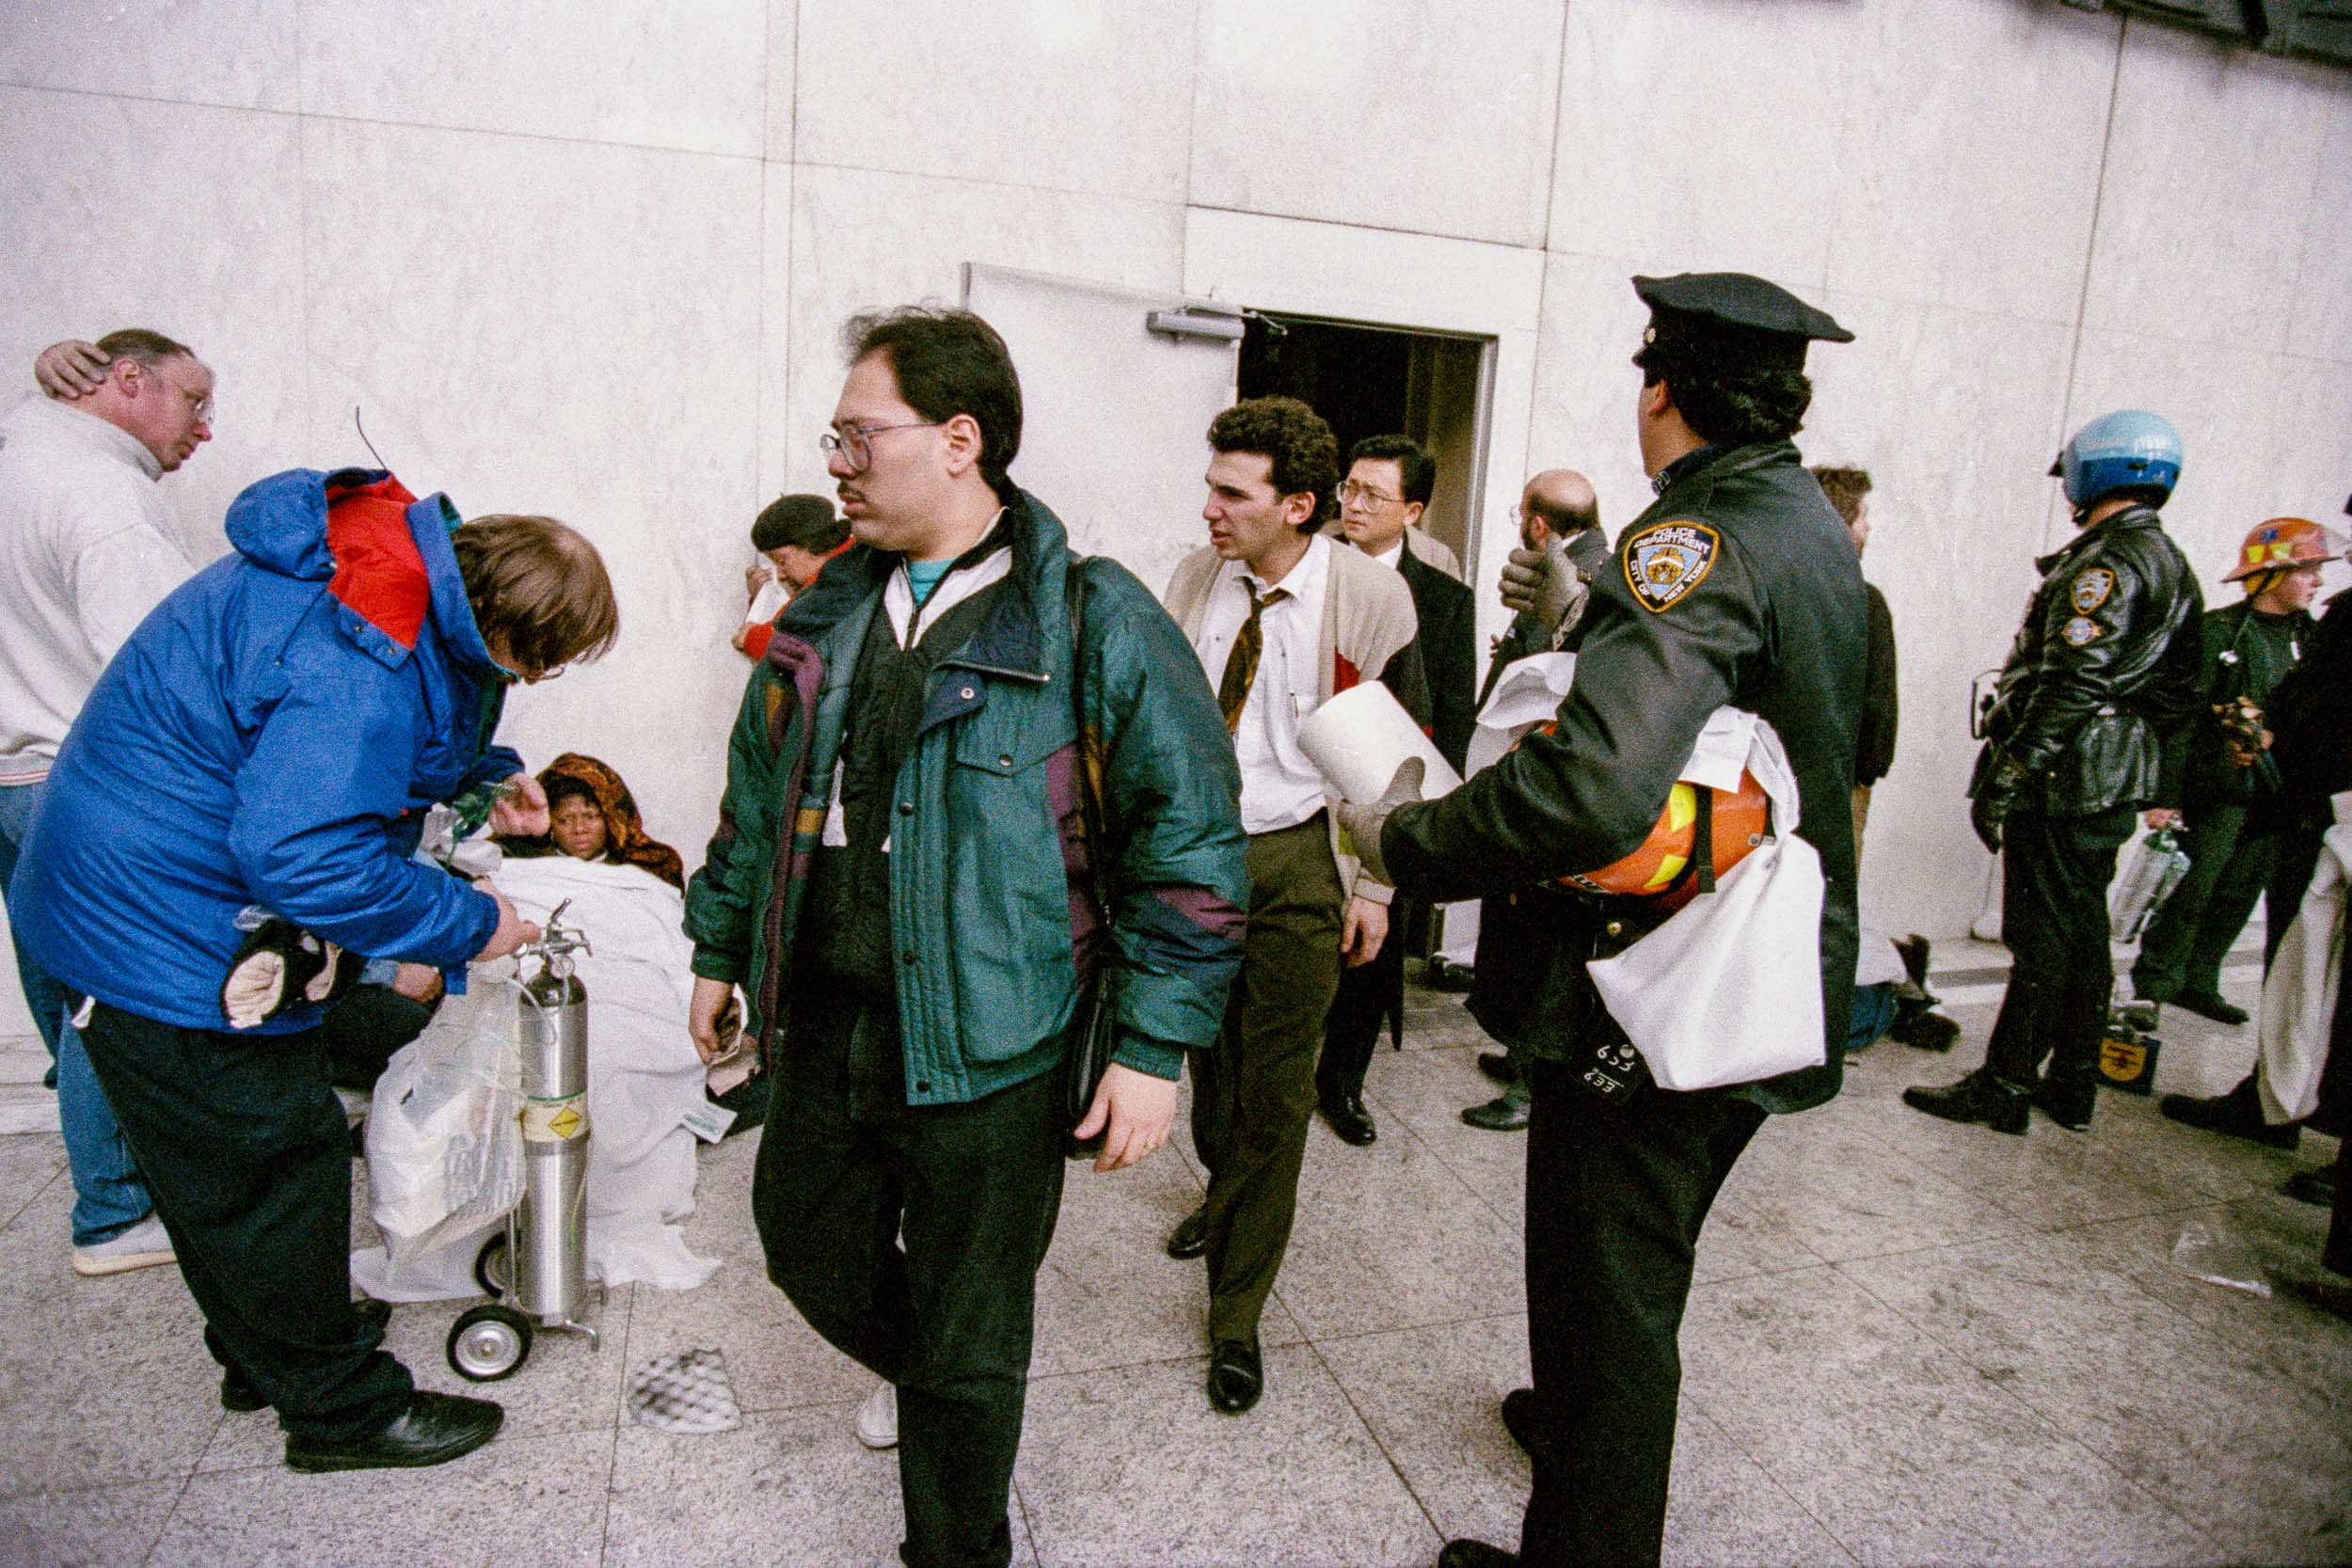 Office workers exiting the stairwell into the lobby of the World Trade Center, NY, 1993